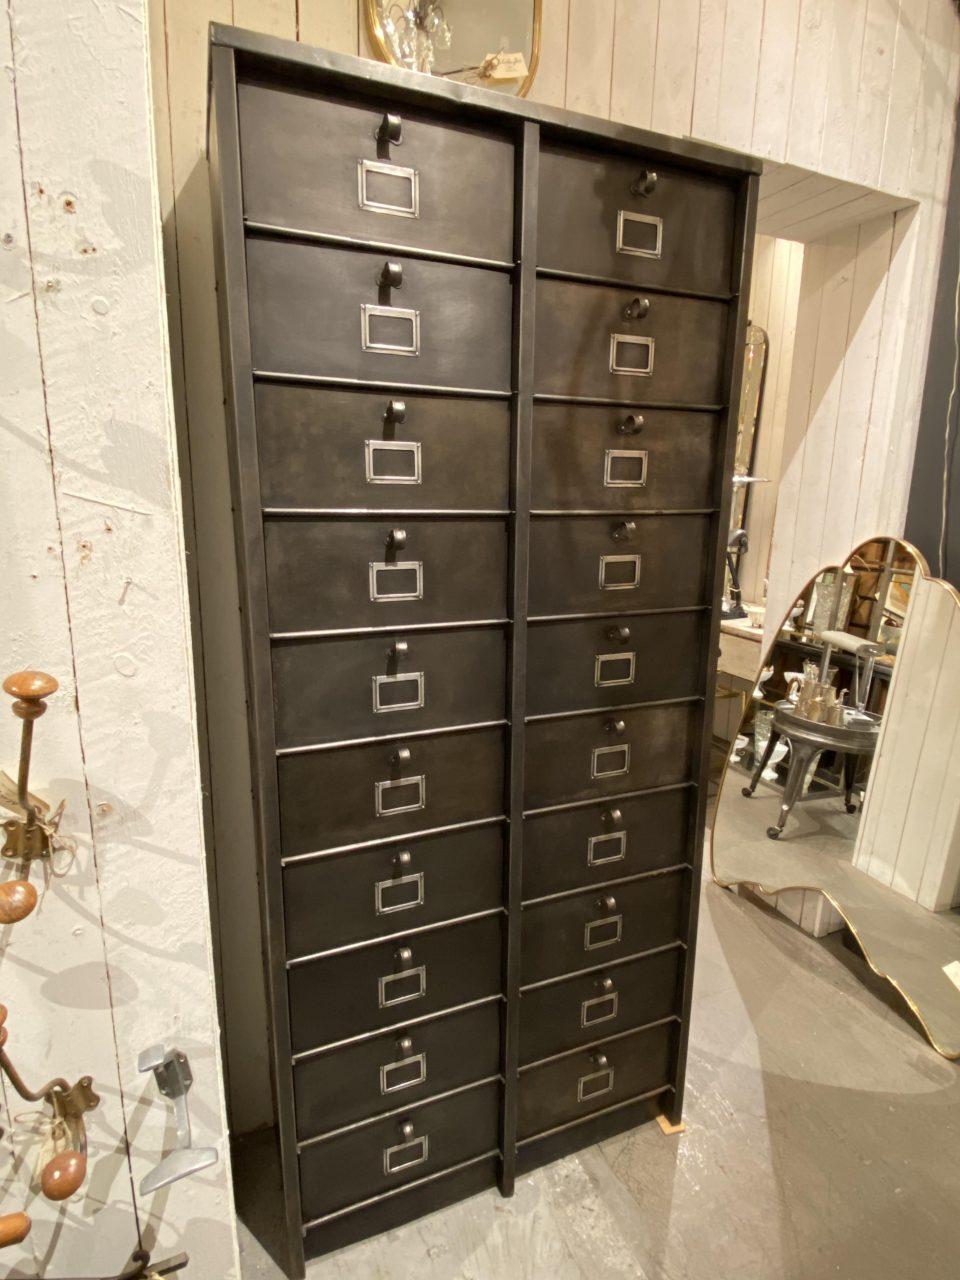 Tall and slim vintage cabinet filing cabinet, in a cool raw metal look. We have deacidified it from the old paint remnants, treated and polished the piece, so now it appears raw and inviting in a dark masculine and industrial look. These filing